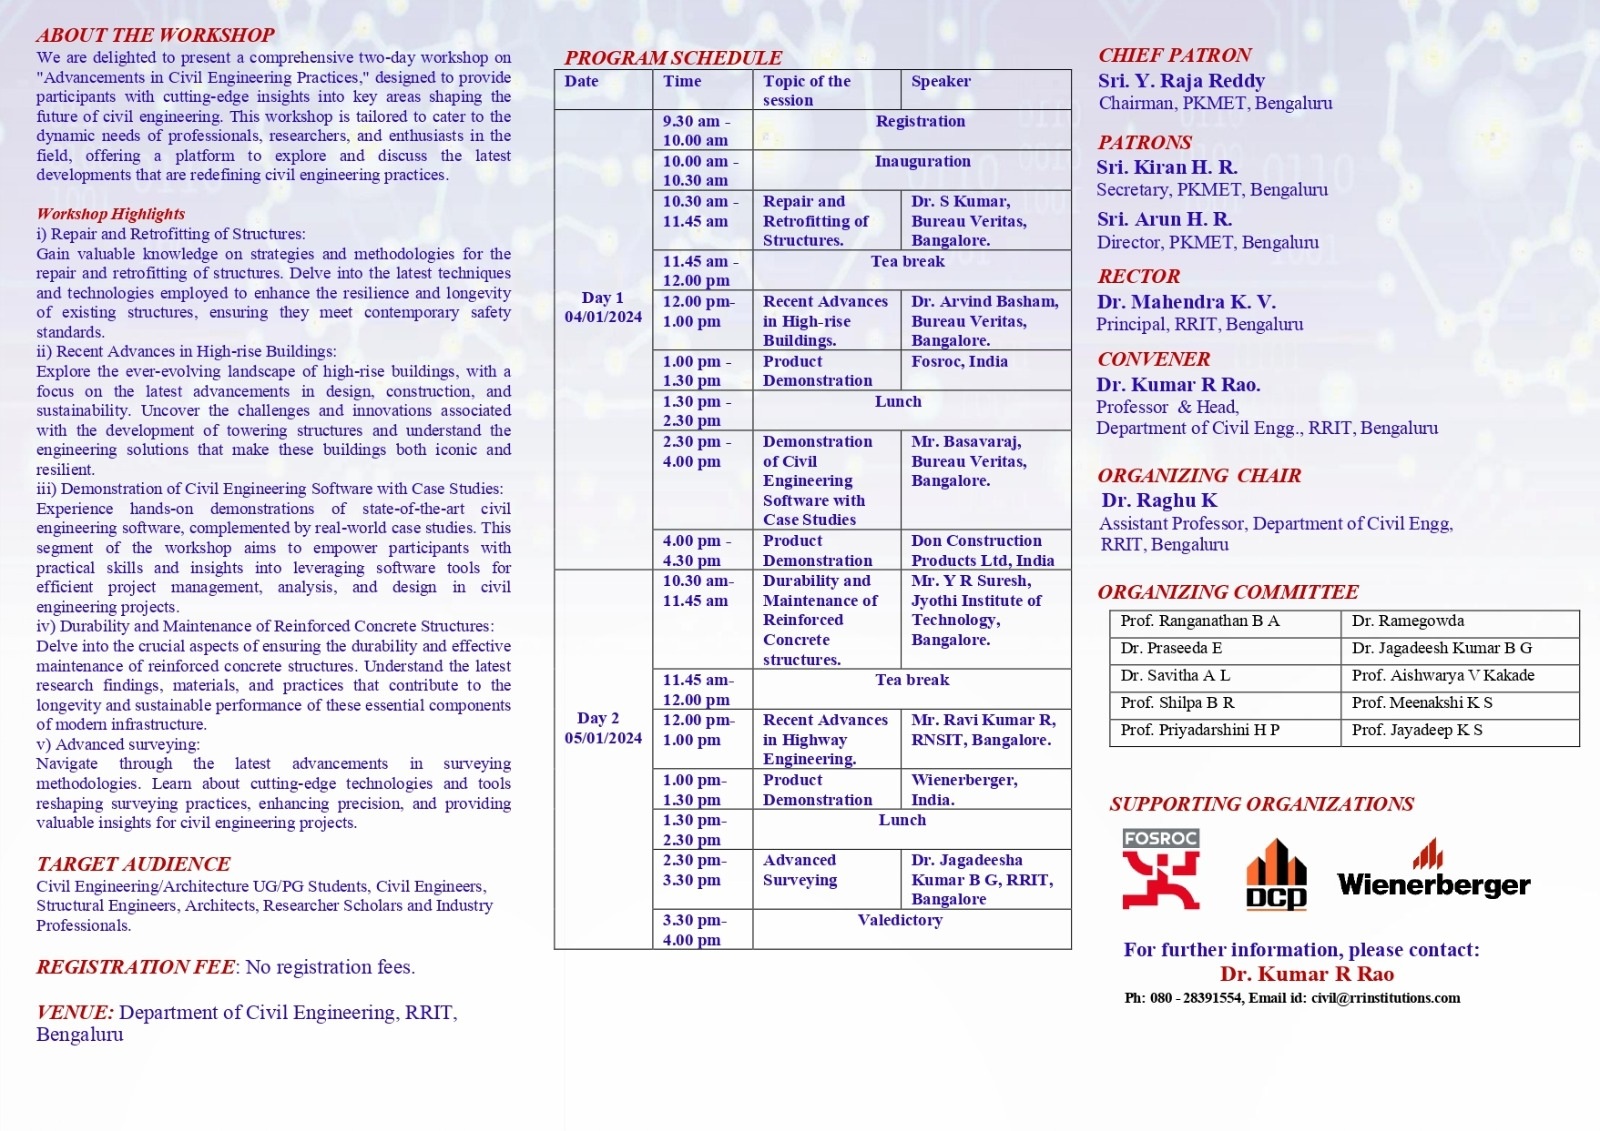 Department of Civil Engineering in Association with ACCE (India) is organising Two day technical workshop on                        ” Advancements in Civil Engineering Practices”    on 4th & 5th of January 2024.